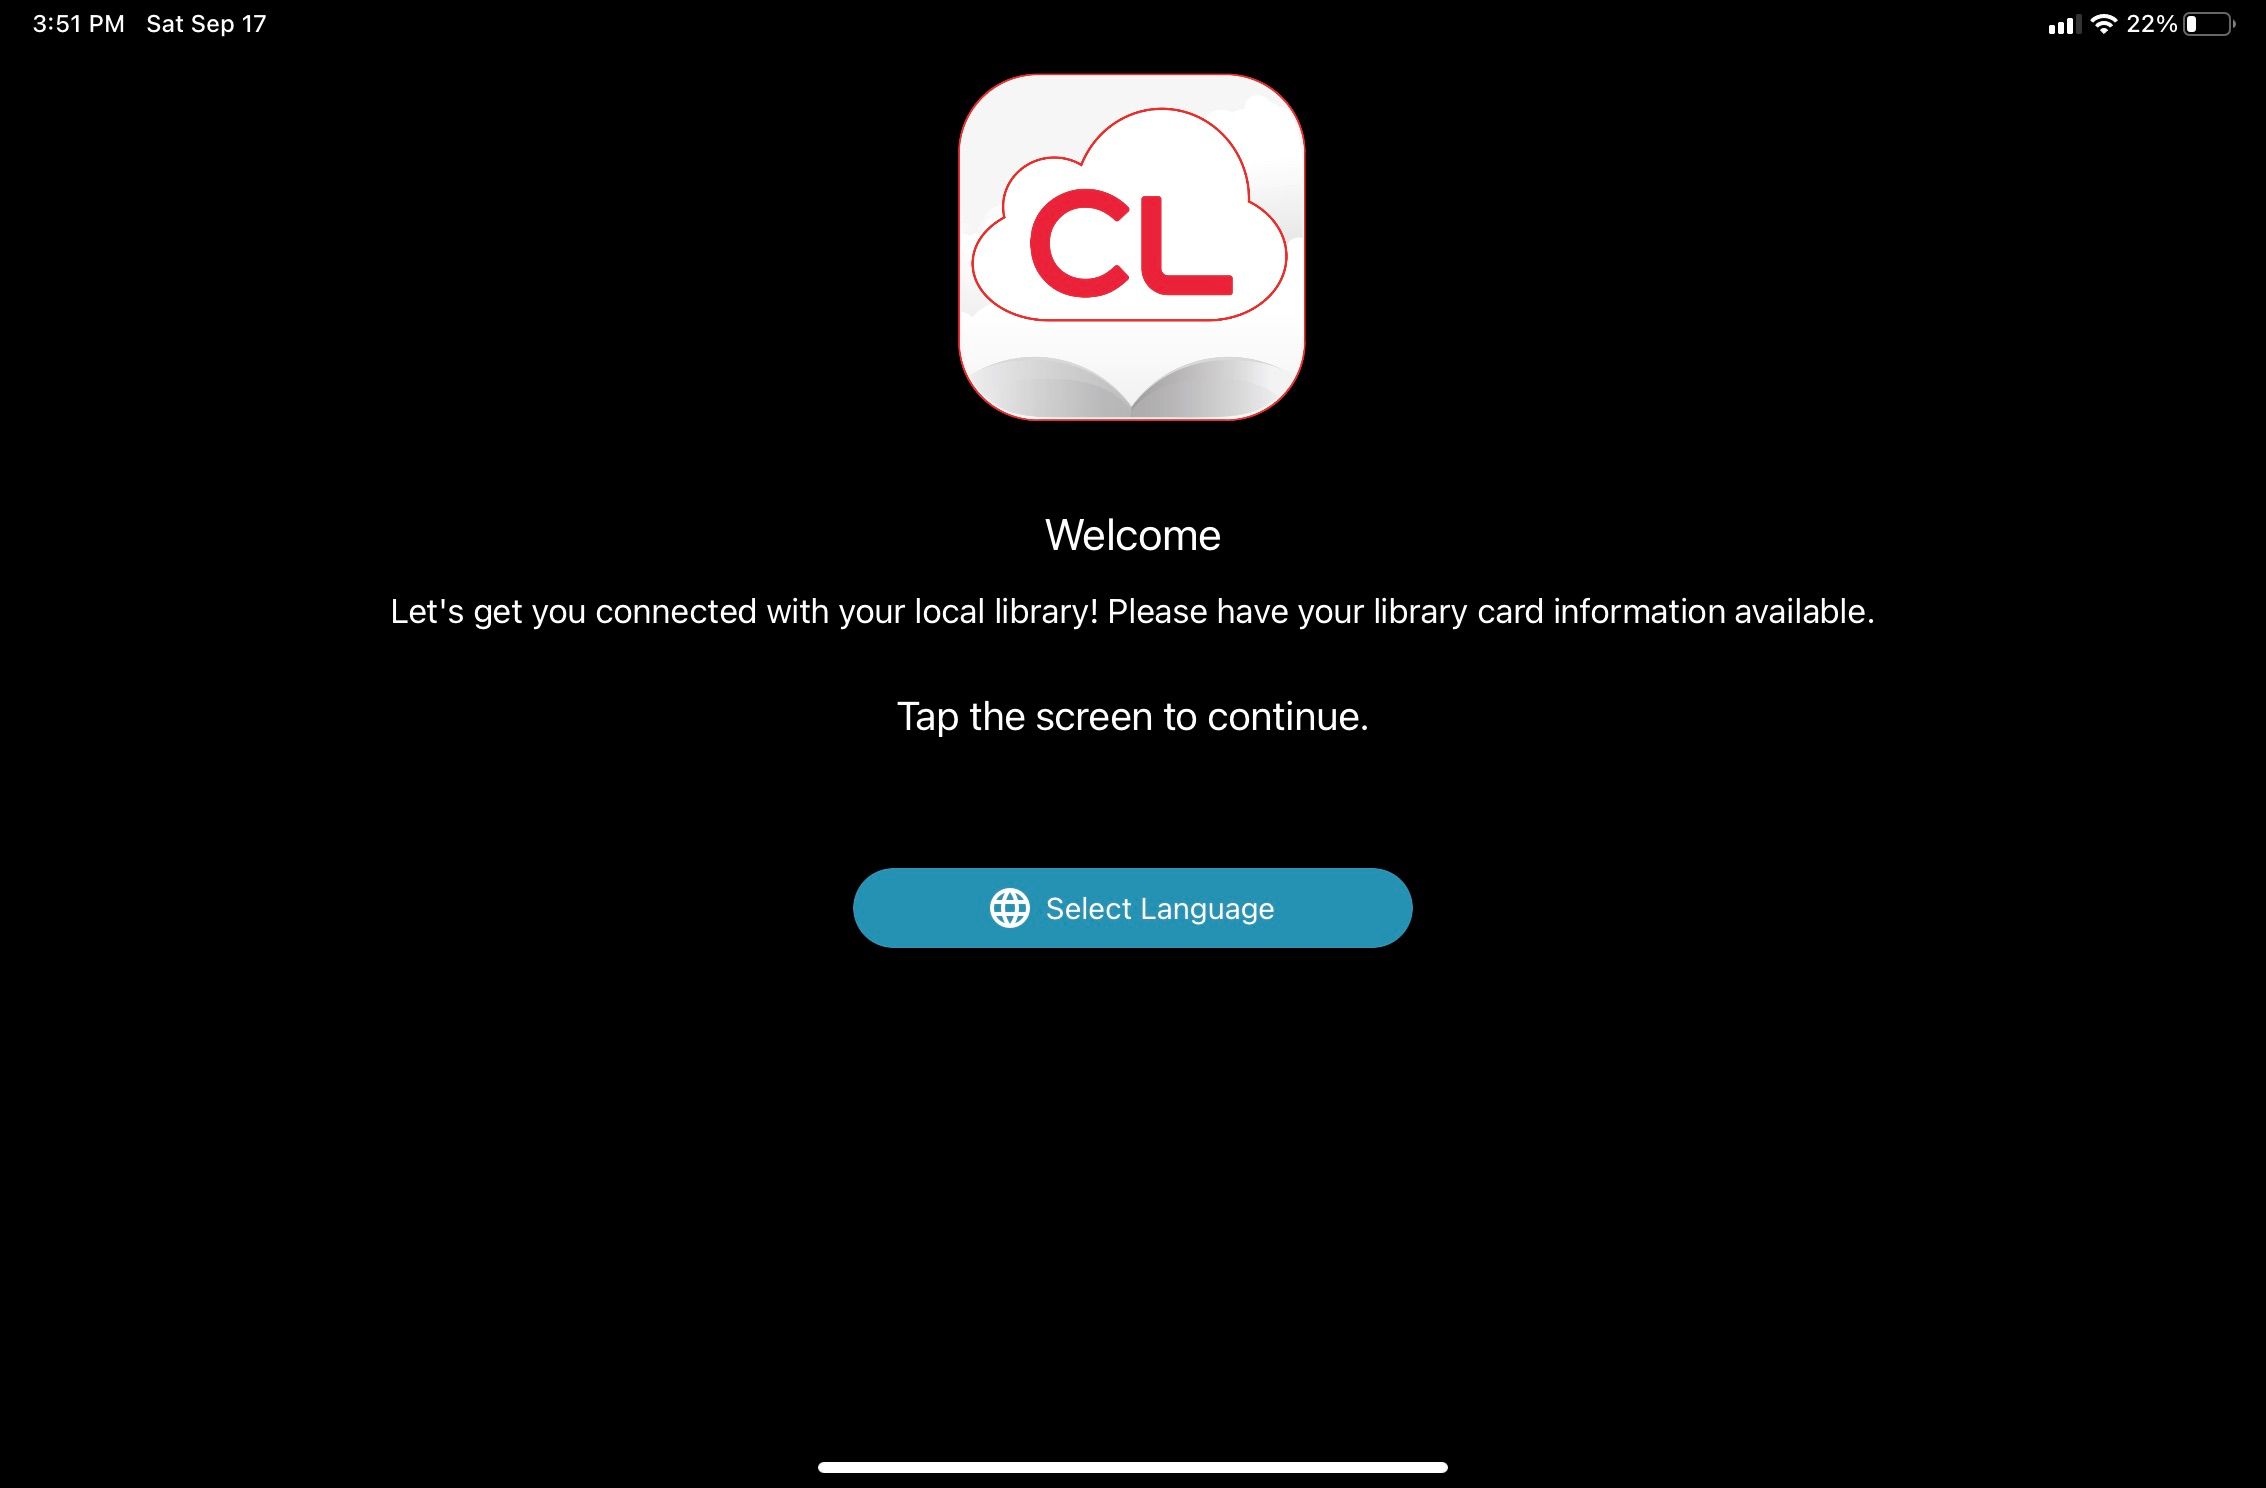 Cloud Library App Page with Cloud Icon